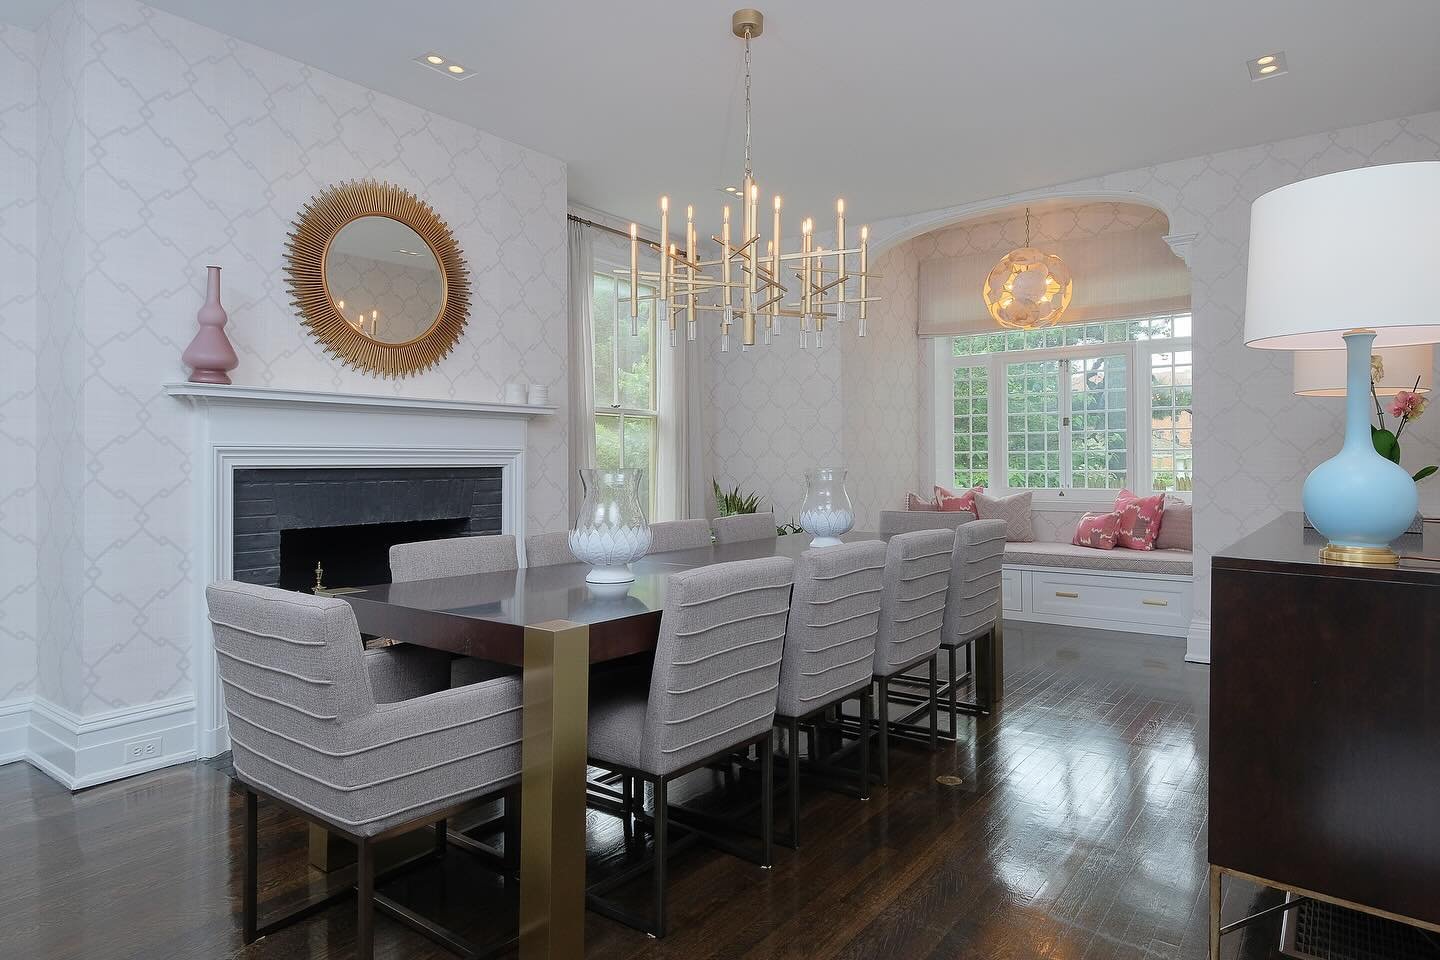 Flashback to this beautiful dining space we did a few years back in Long Island! #diningspaces #customspaces #loveyourspace #designerspaces #longislanddesign #gardencitydesign #dmdteam #dimackdesigns